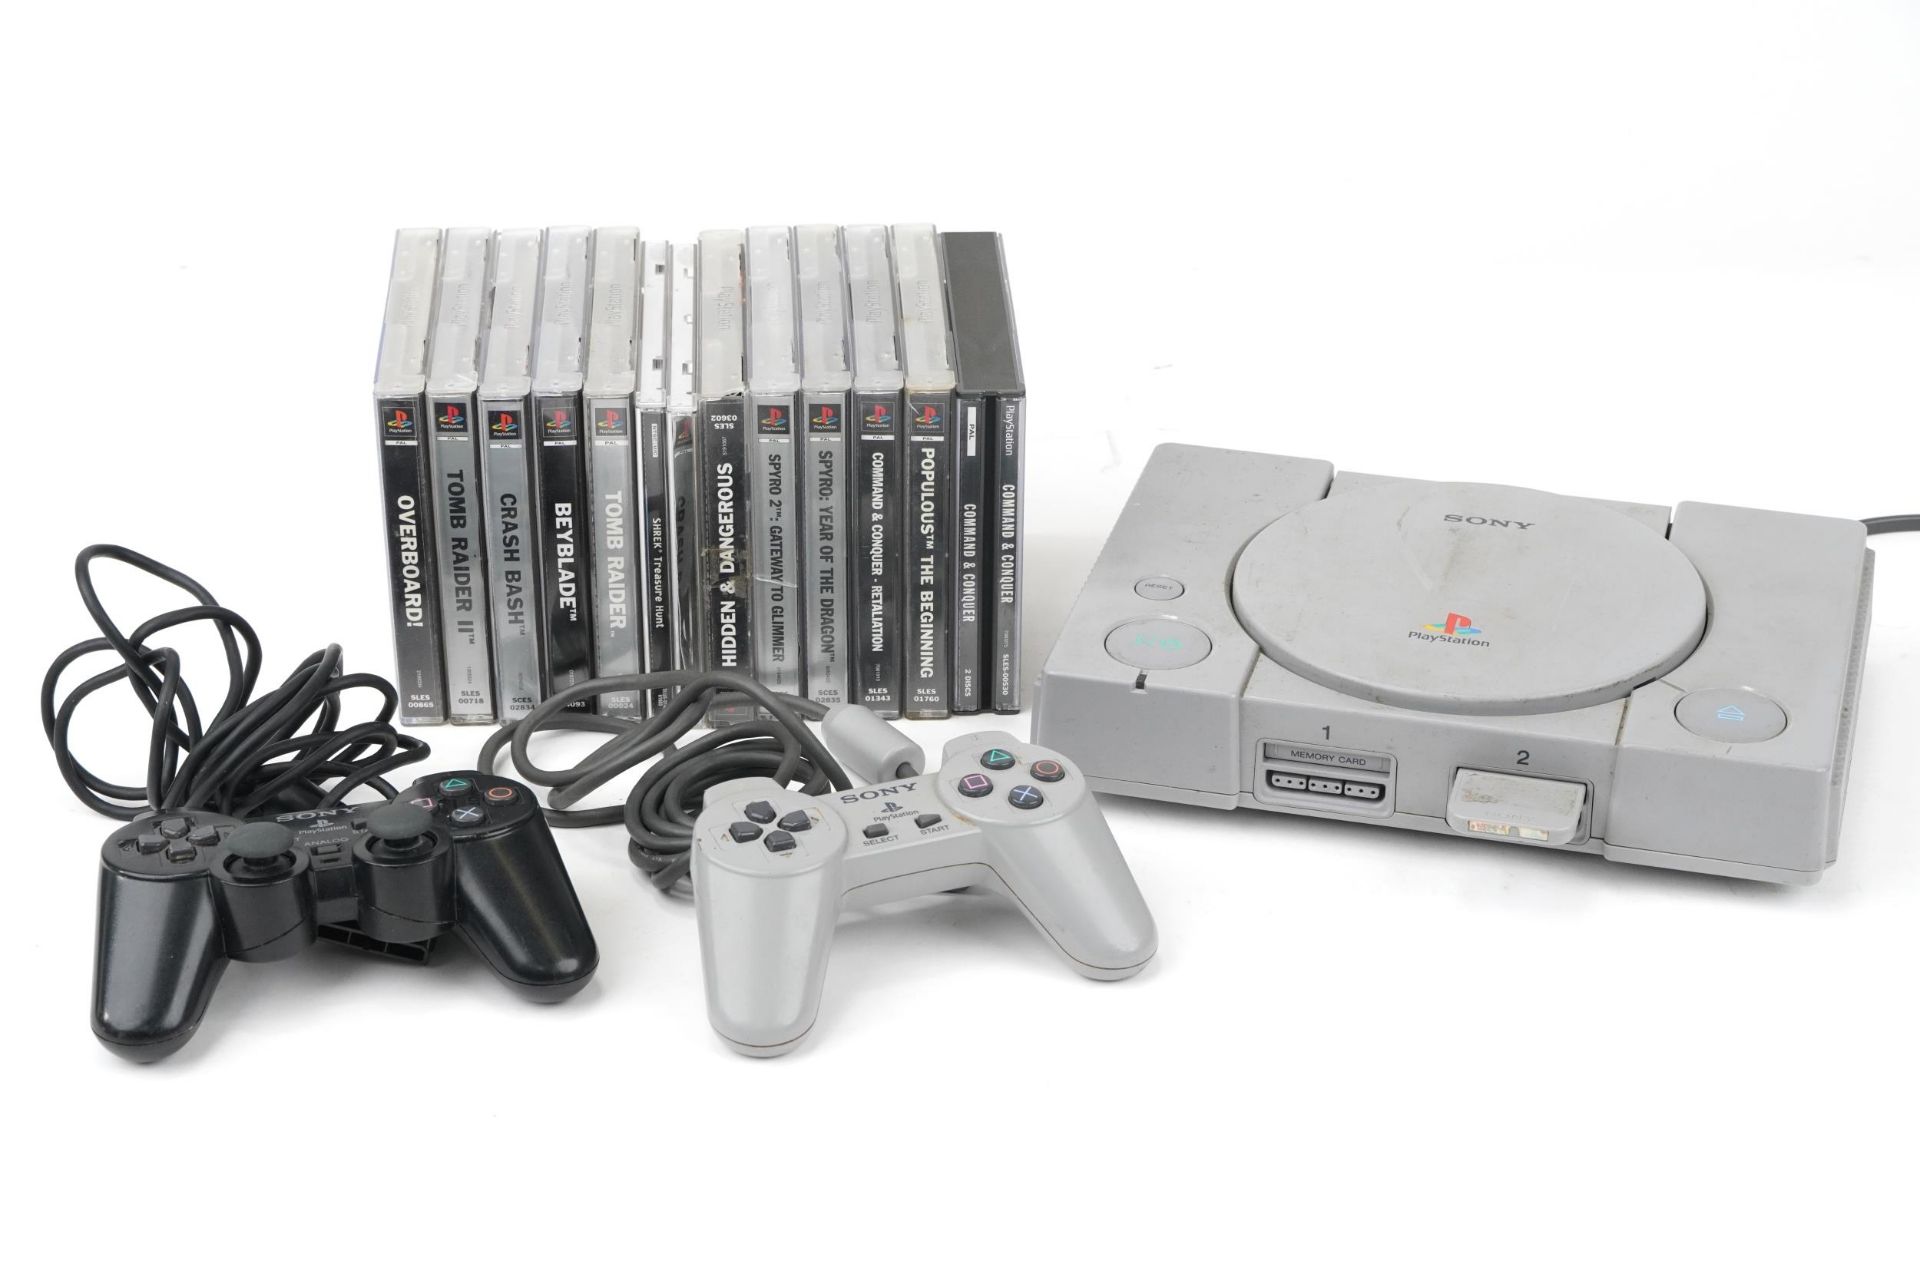 Sony PlayStation 1 games console with controllers and a collection of games